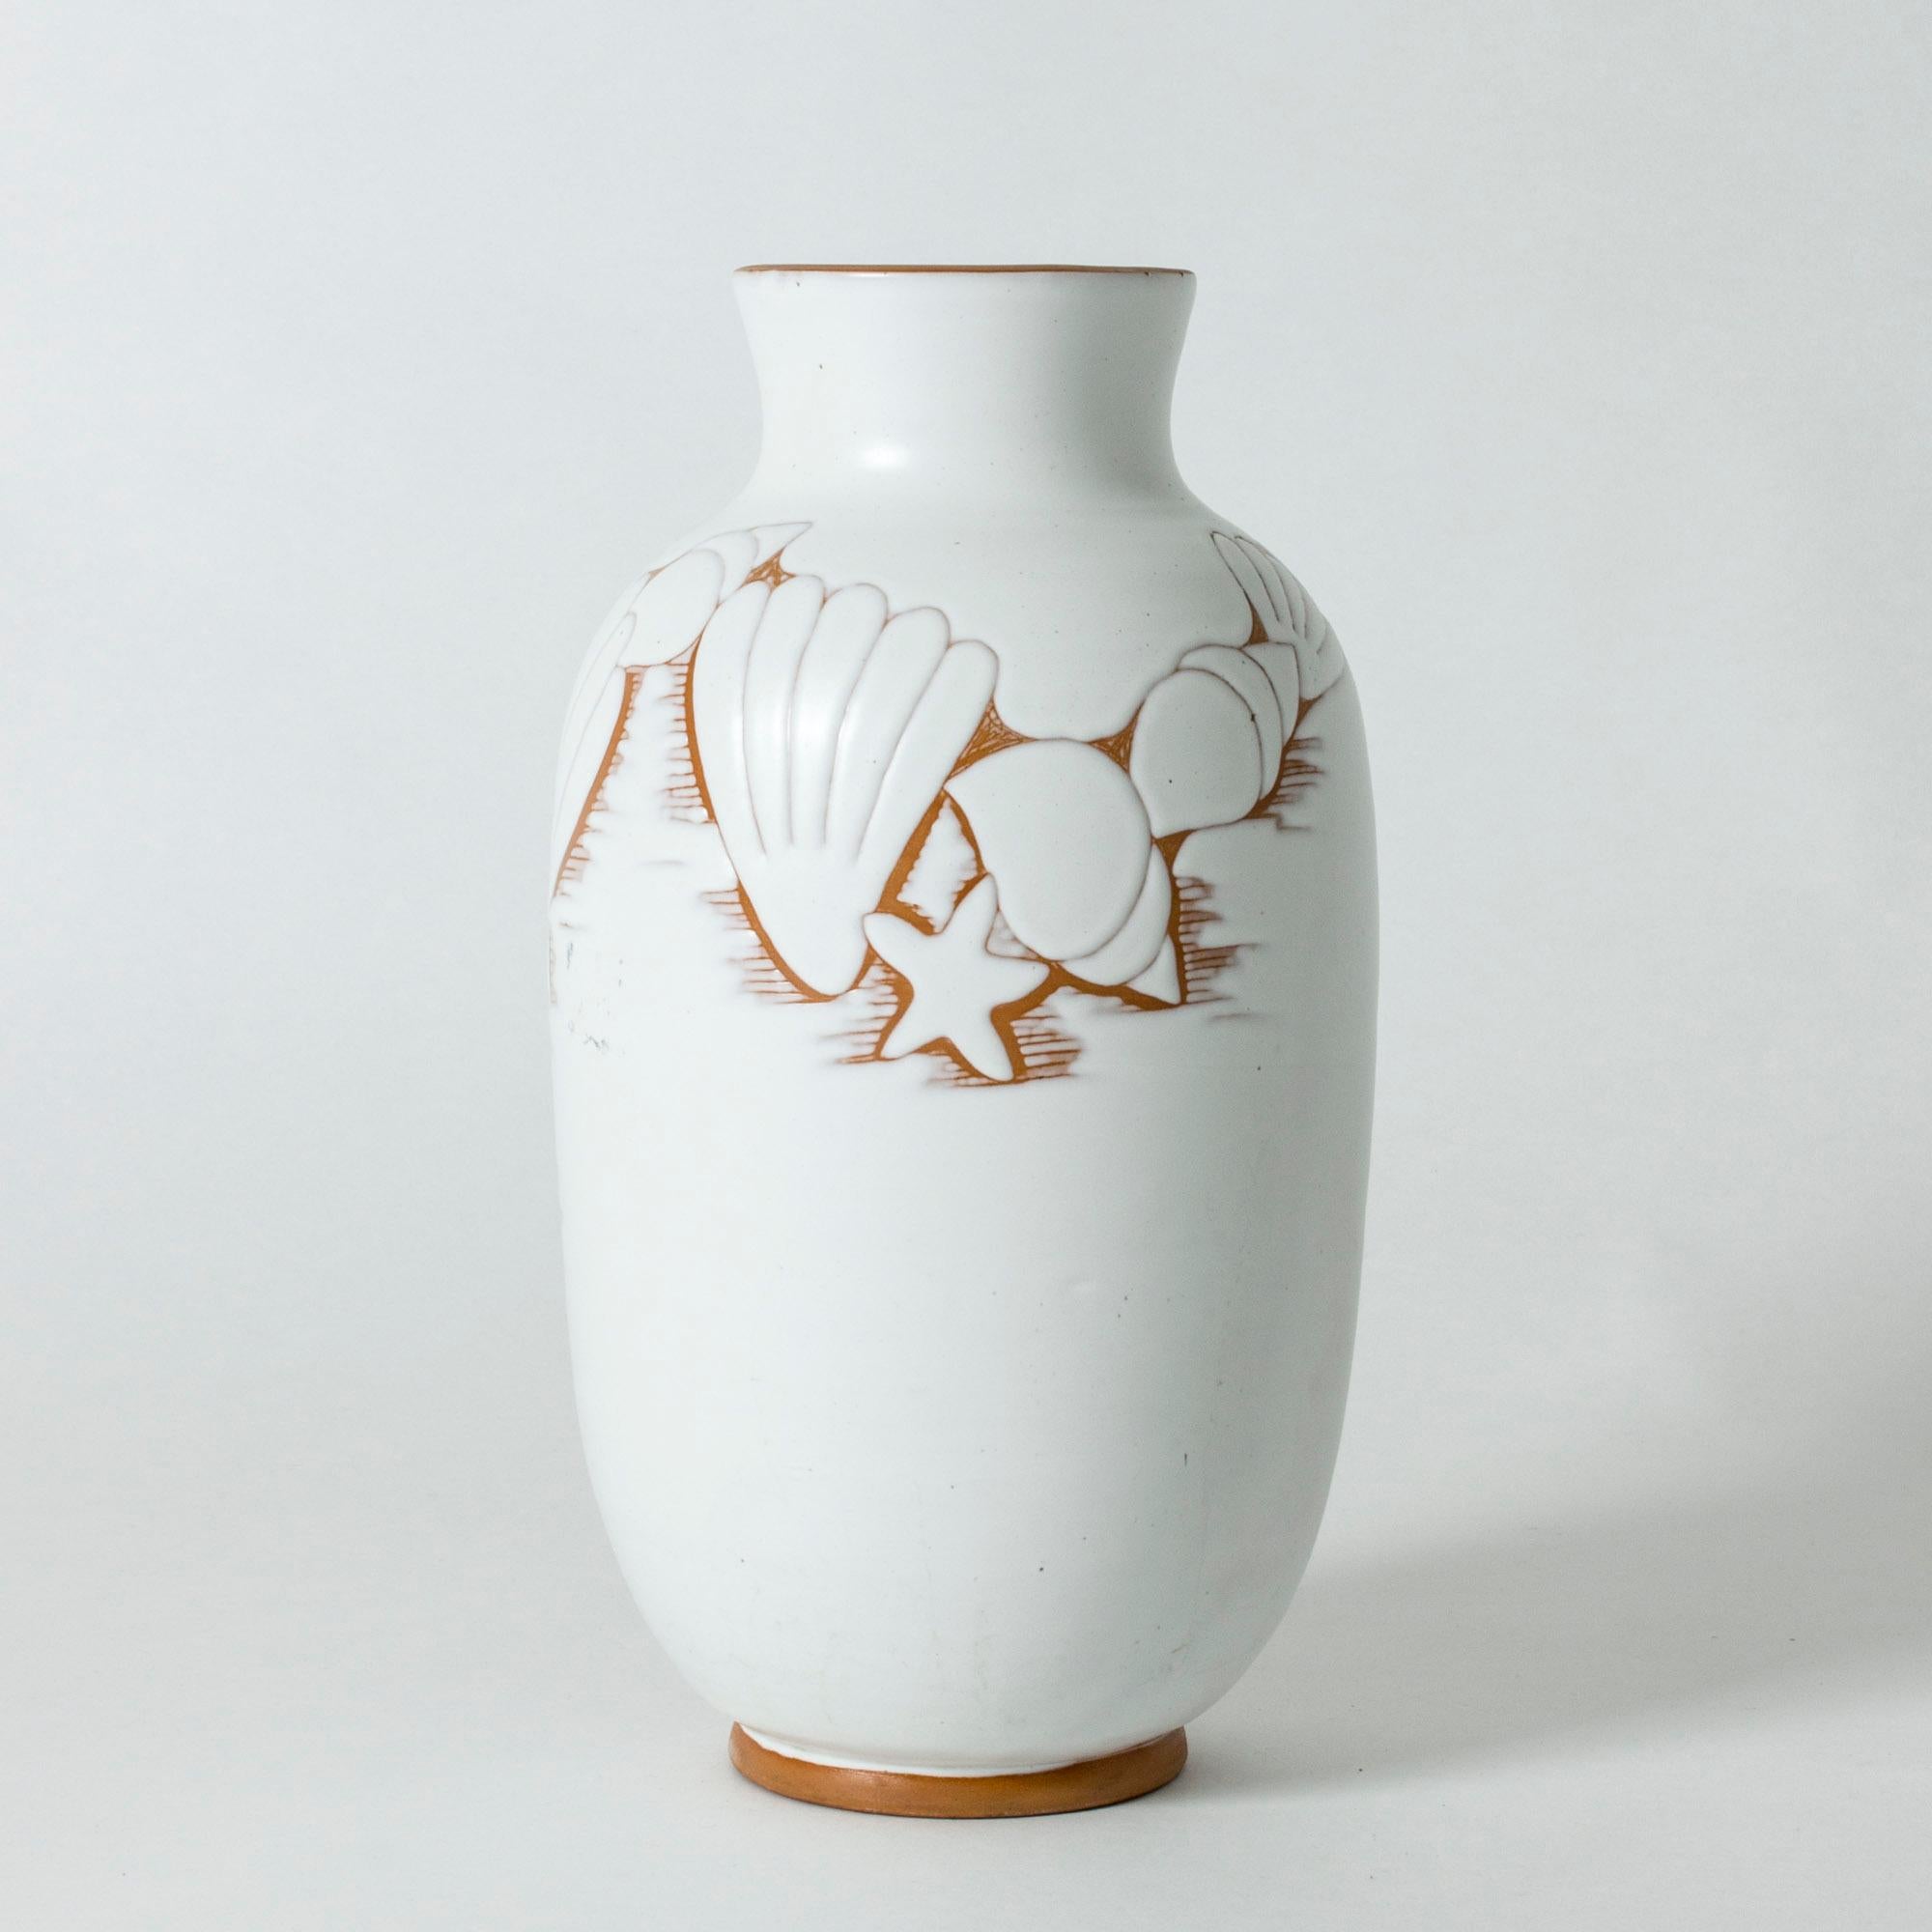 Beautiful, large earthenware vase by Anna-Lisa Thomson. White glaze with a decor of shells and starfish. The contrasting unglazed earthenware emerges in the lines of the decor and around the rim.